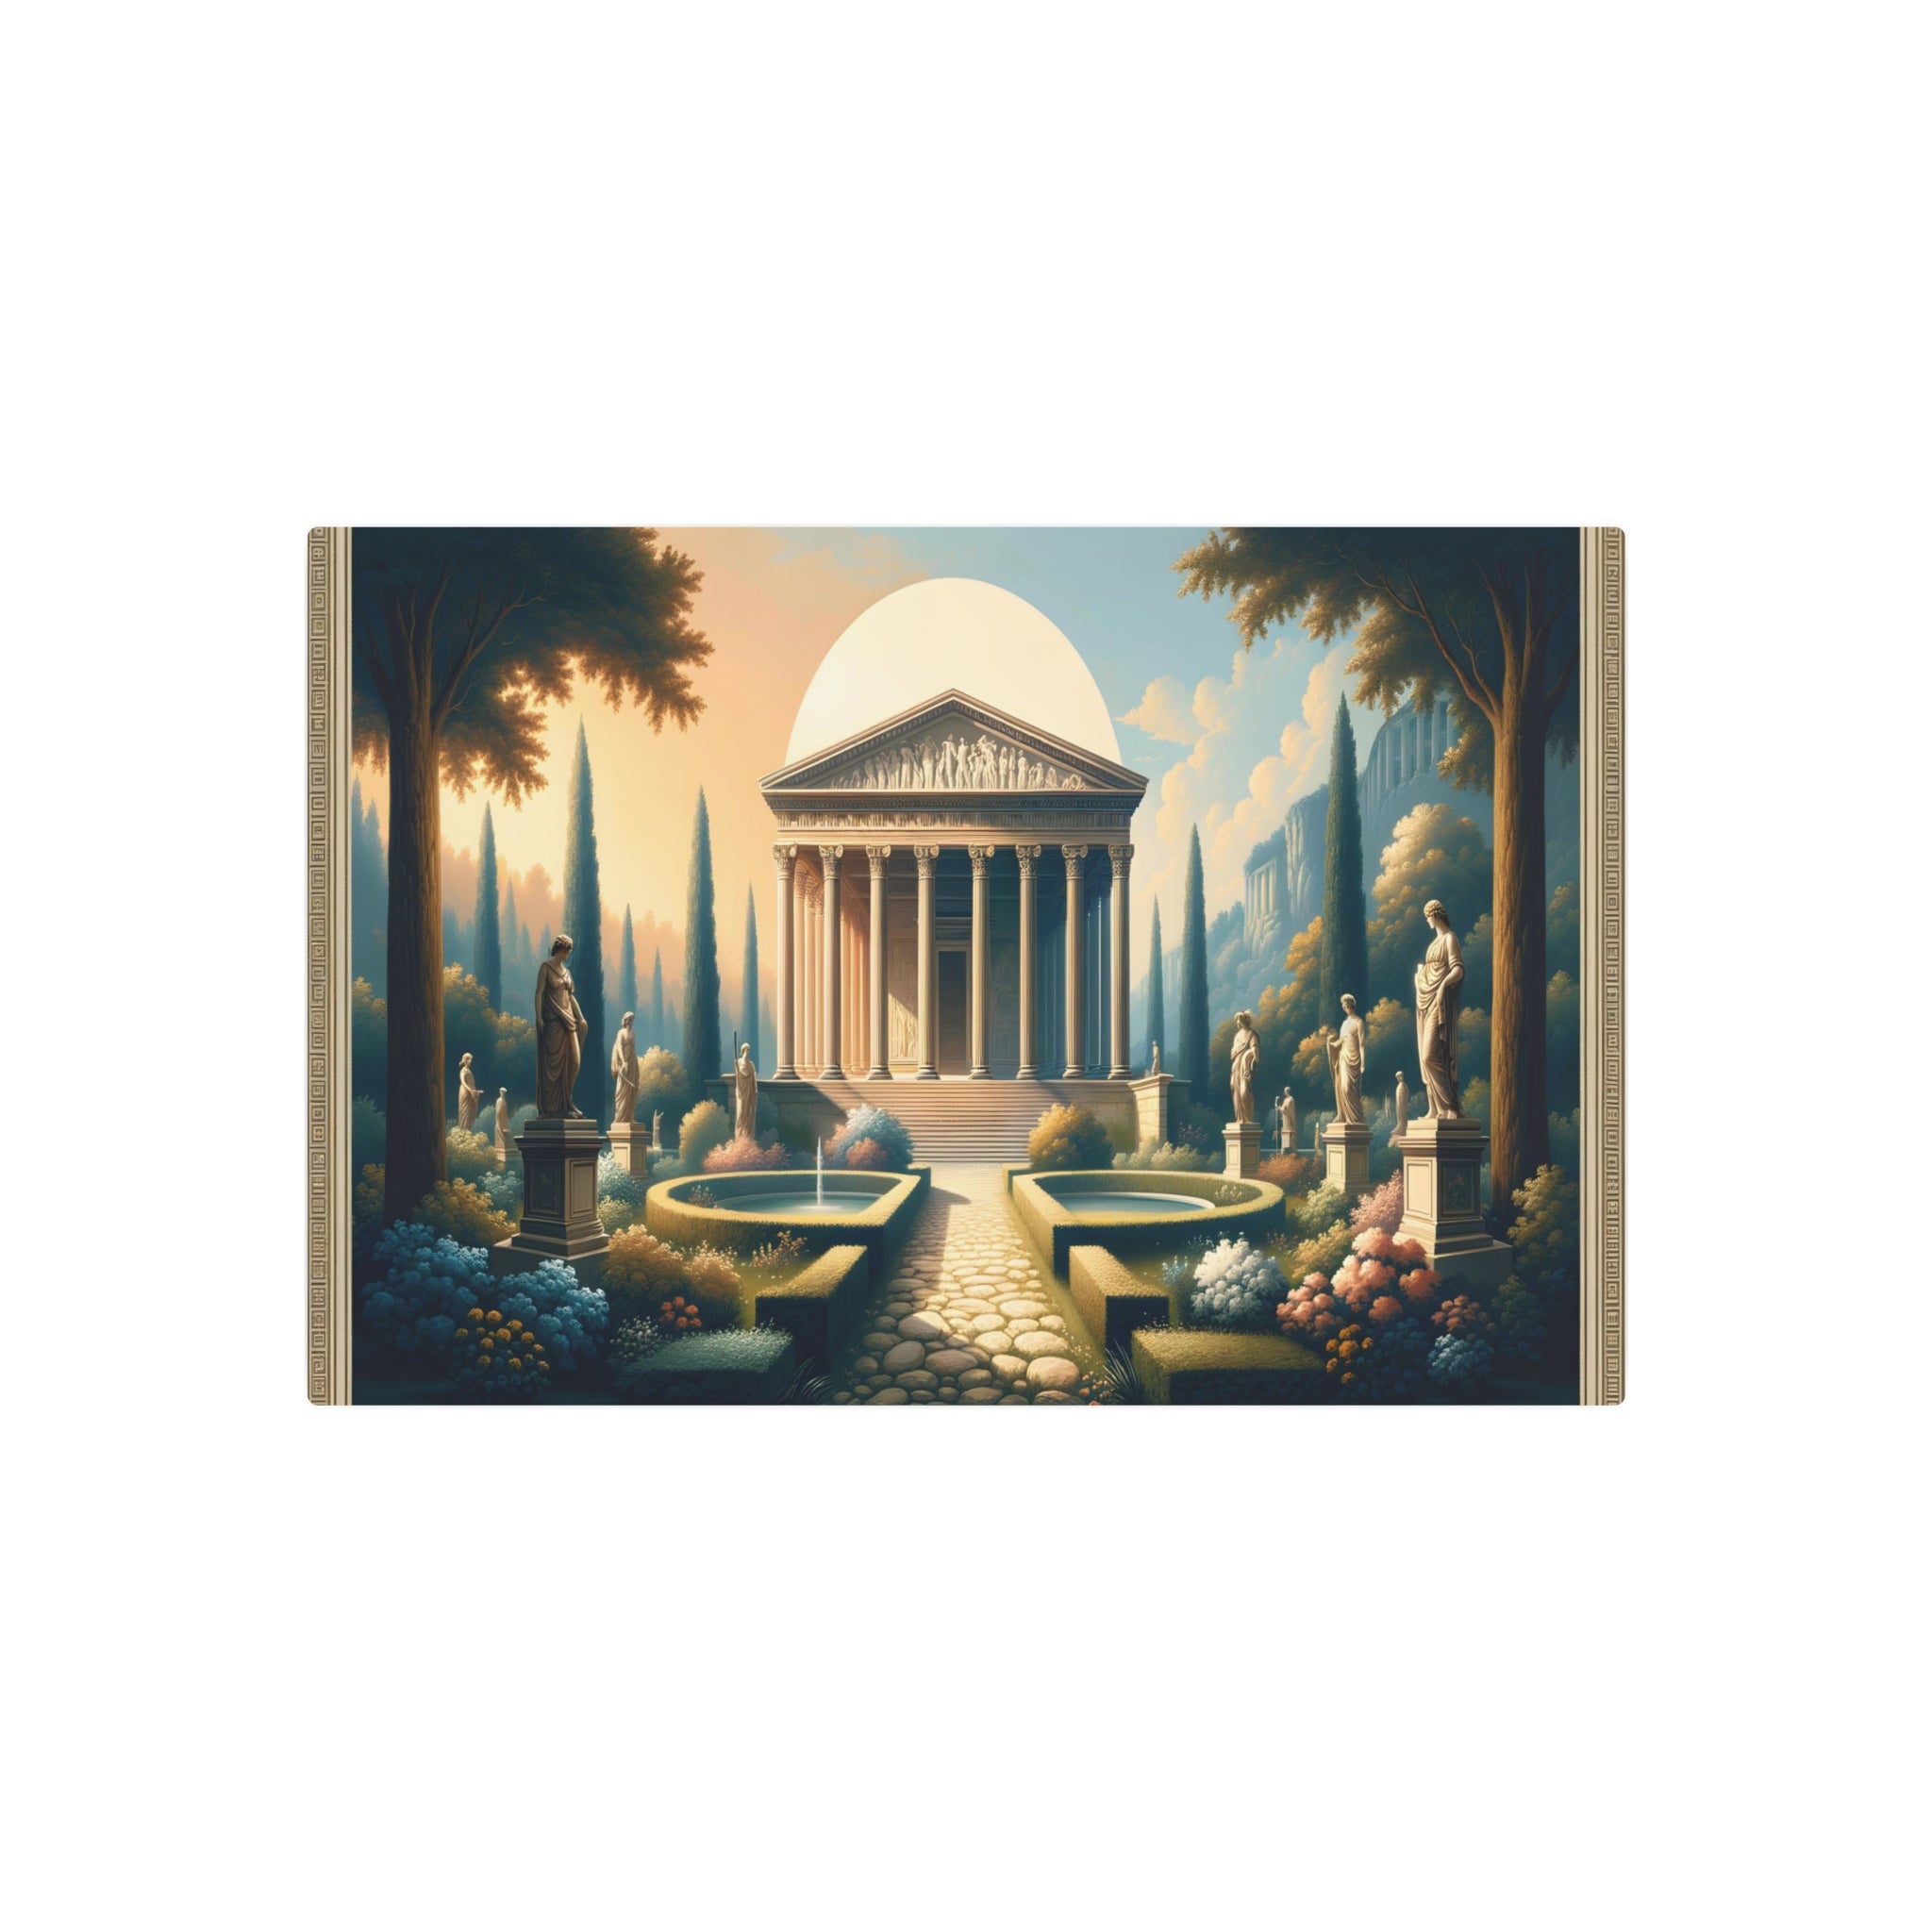 Metal Poster Art | "Neoclassic Western Art Piece - Symmetrical, Simple, Historically-Detailed Original Artwork in Neoclassicism Style"